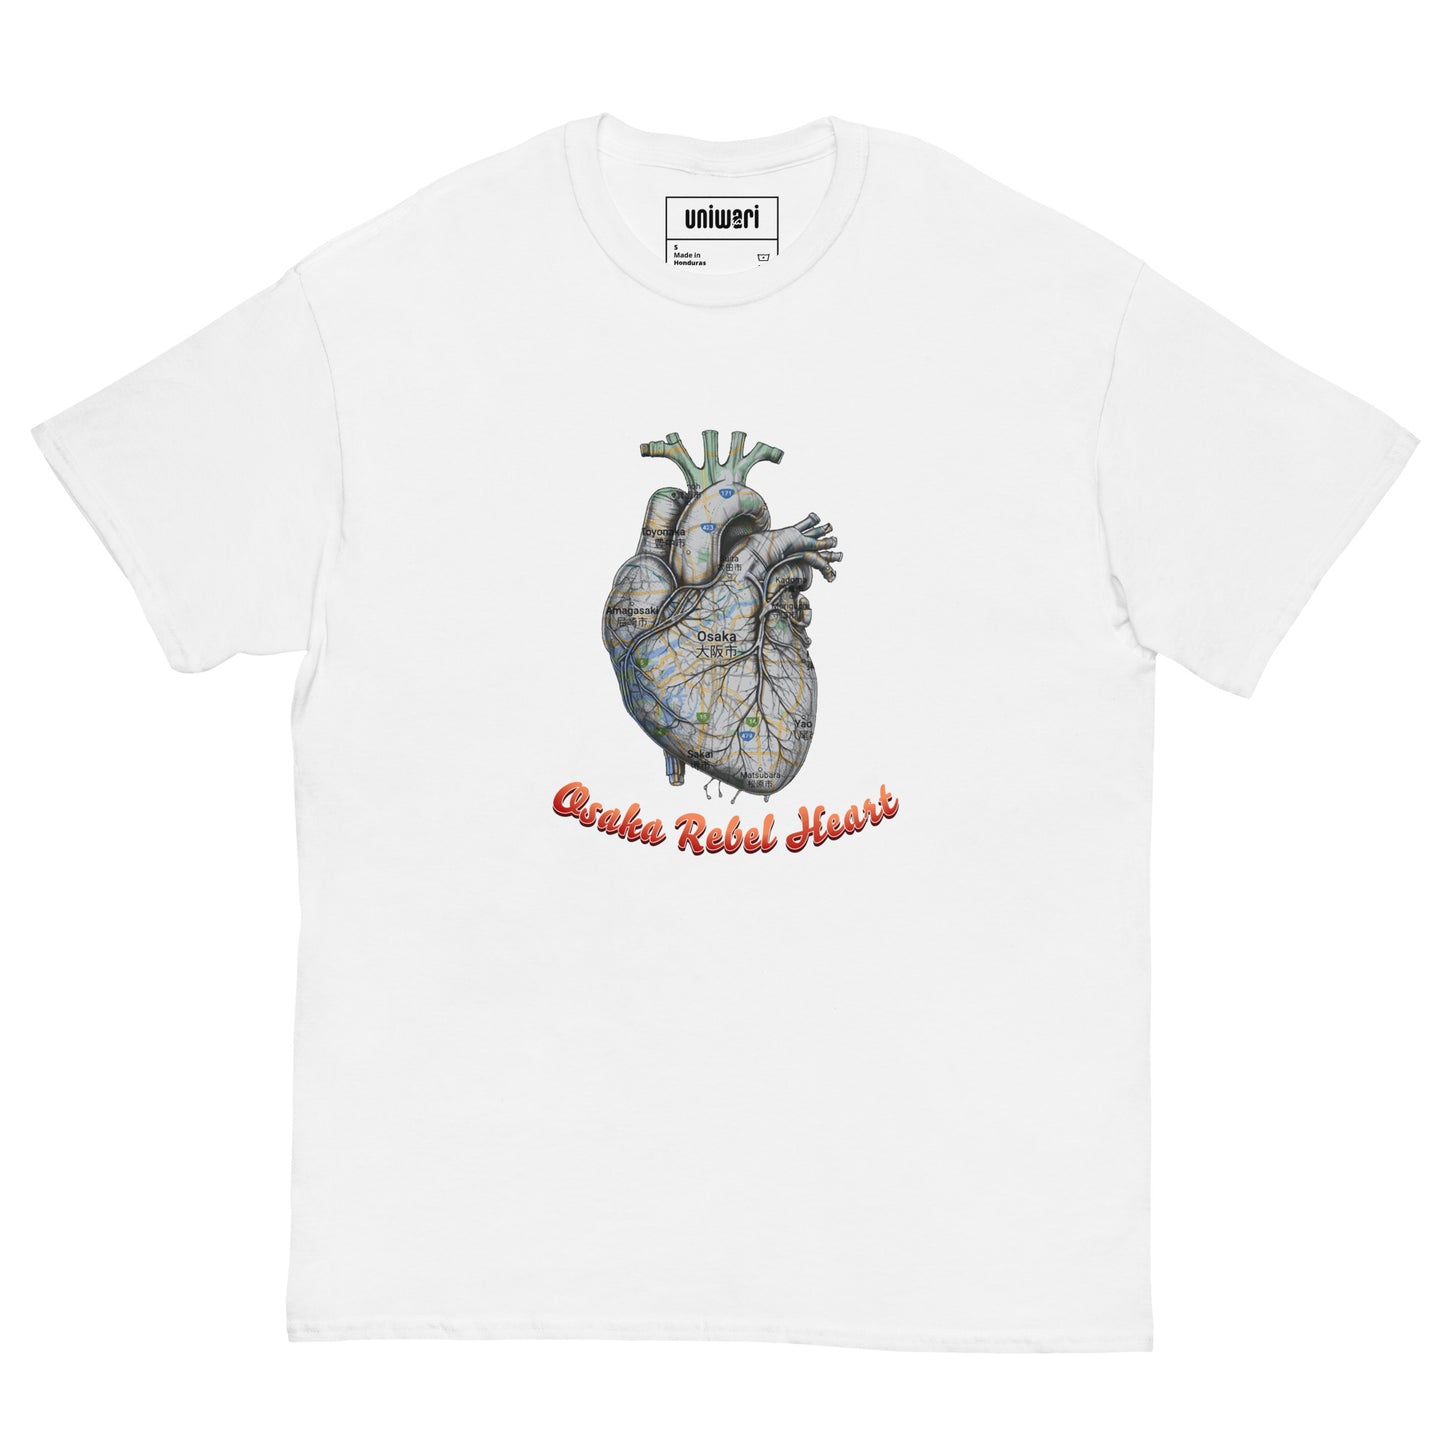 White High Quality Tee - Front Design with a Heart Shaped Map of Osaka and a Phrase "Osaka Rebel Heart" print